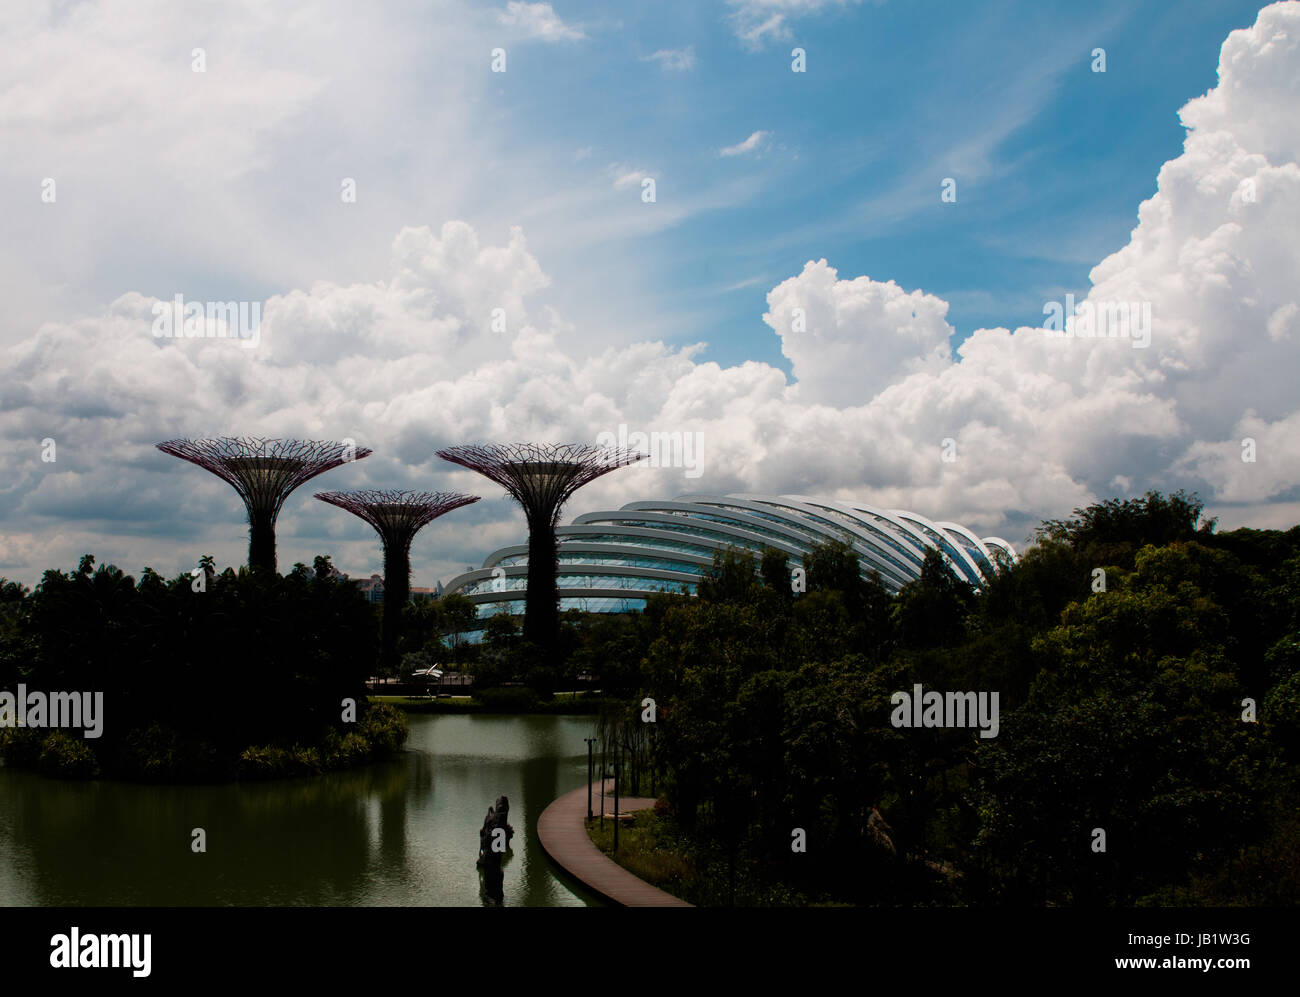 Super tree grove, made of steel, in Gardens by the Bay Singapore Stock Photo